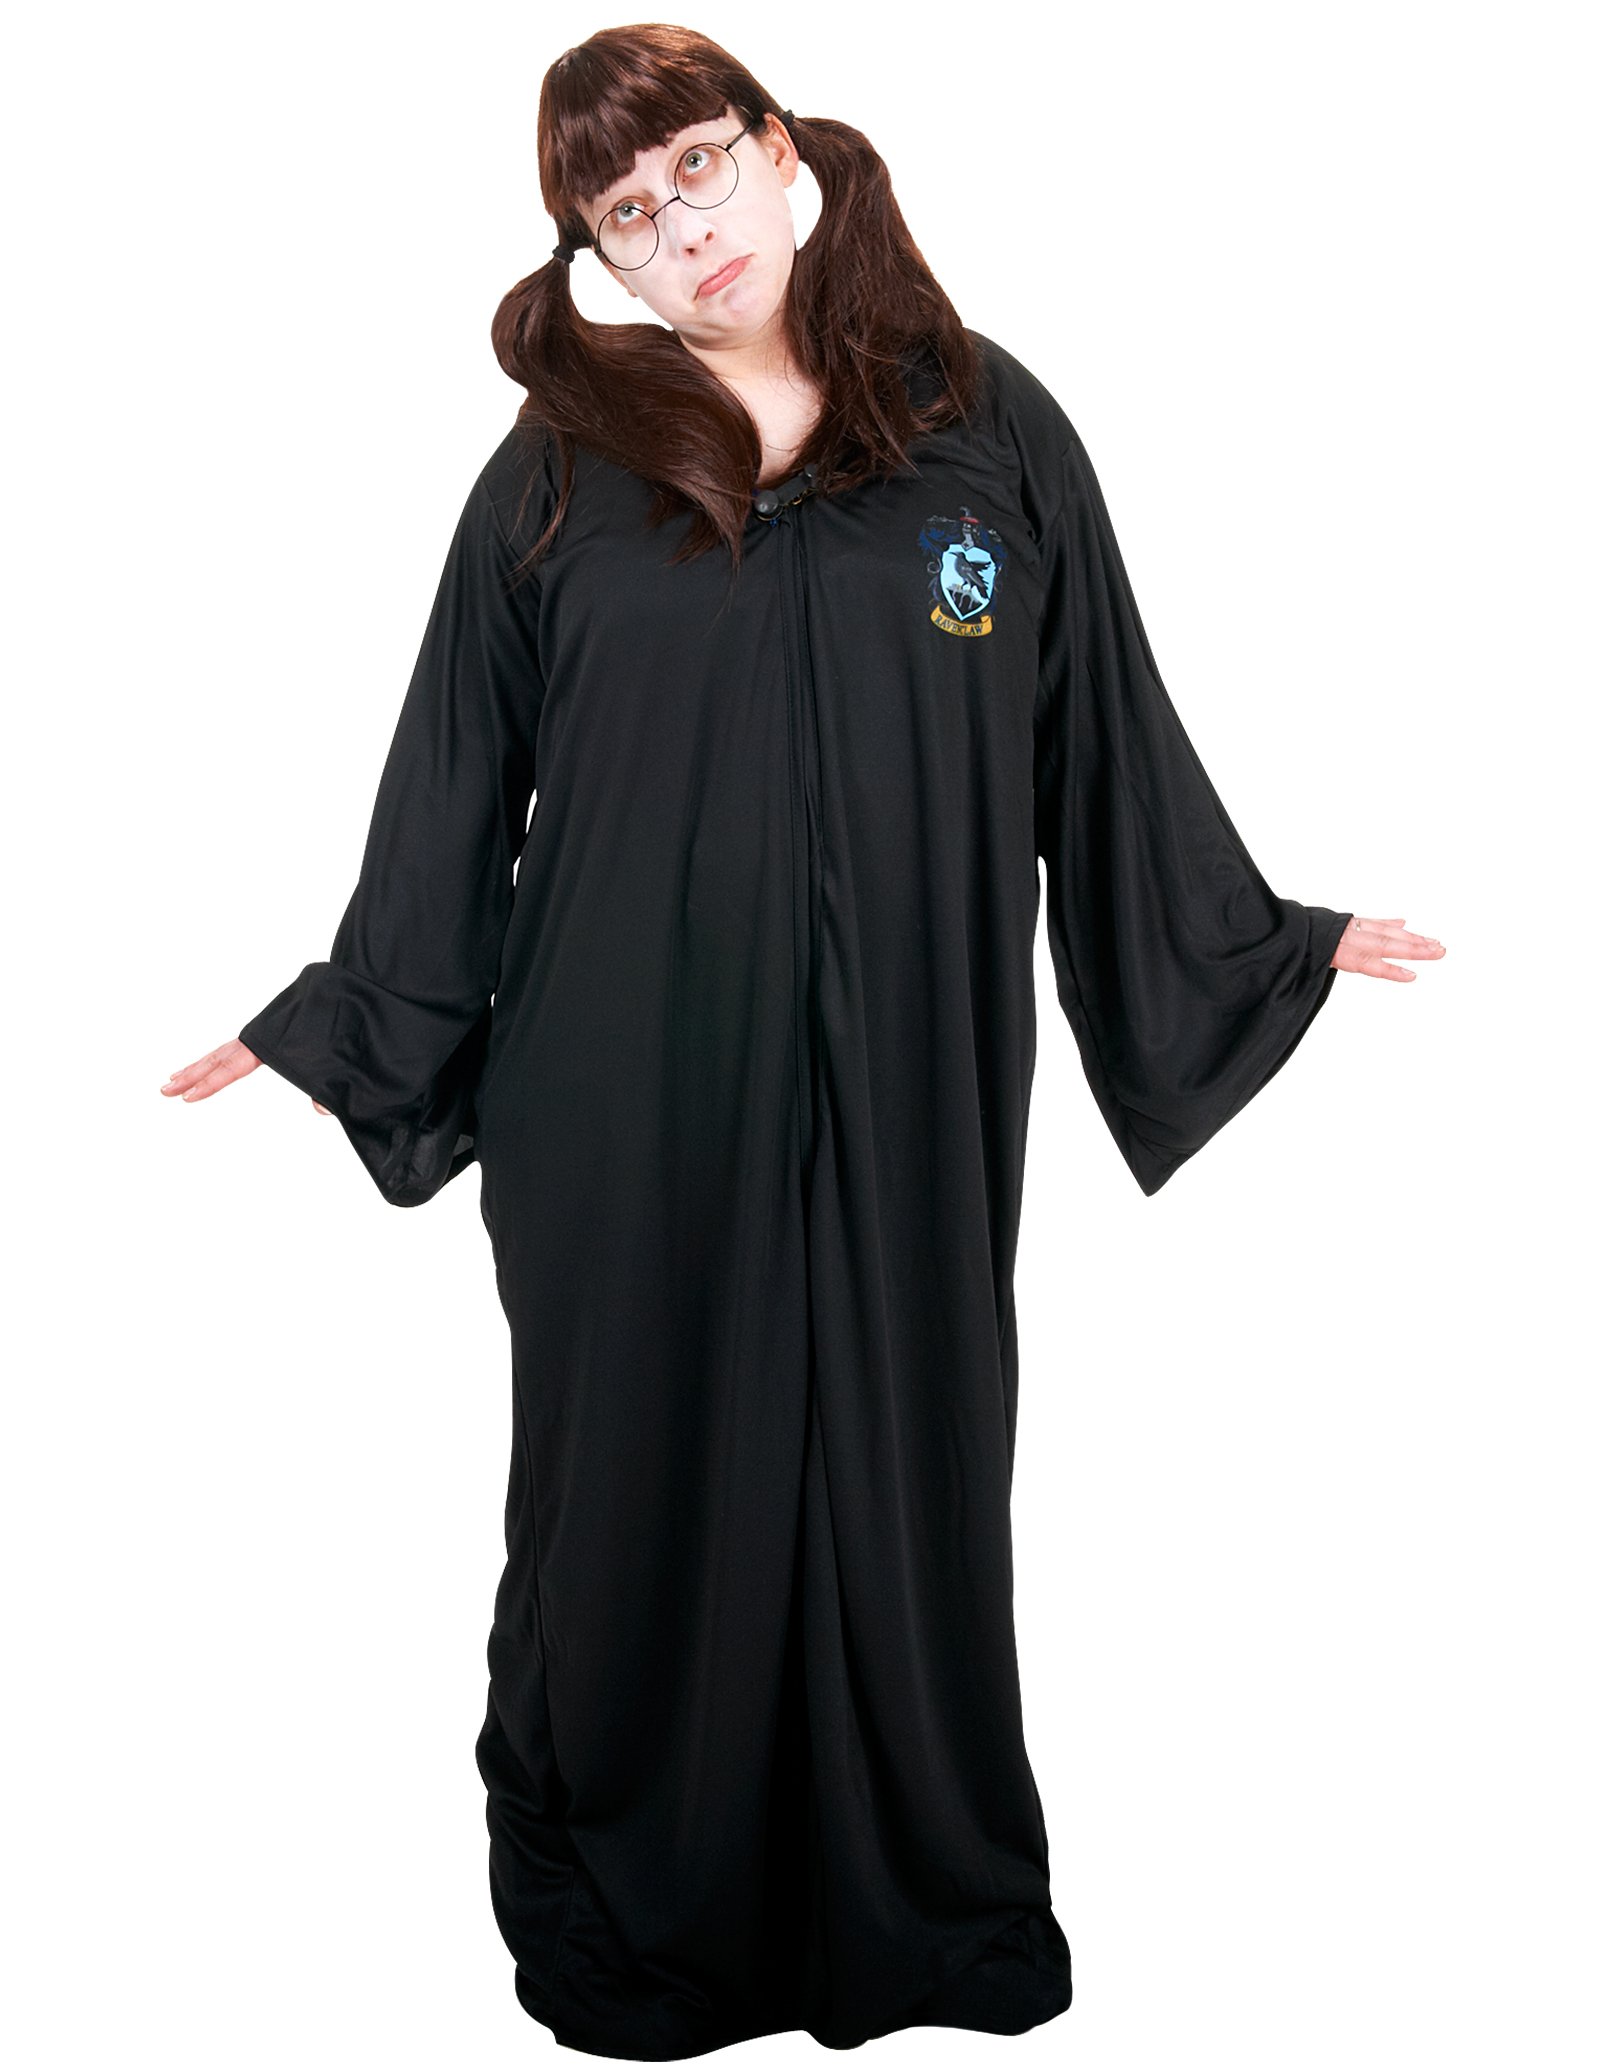 Moaning Myrtle Adult Costume Kit - Click Image to Close